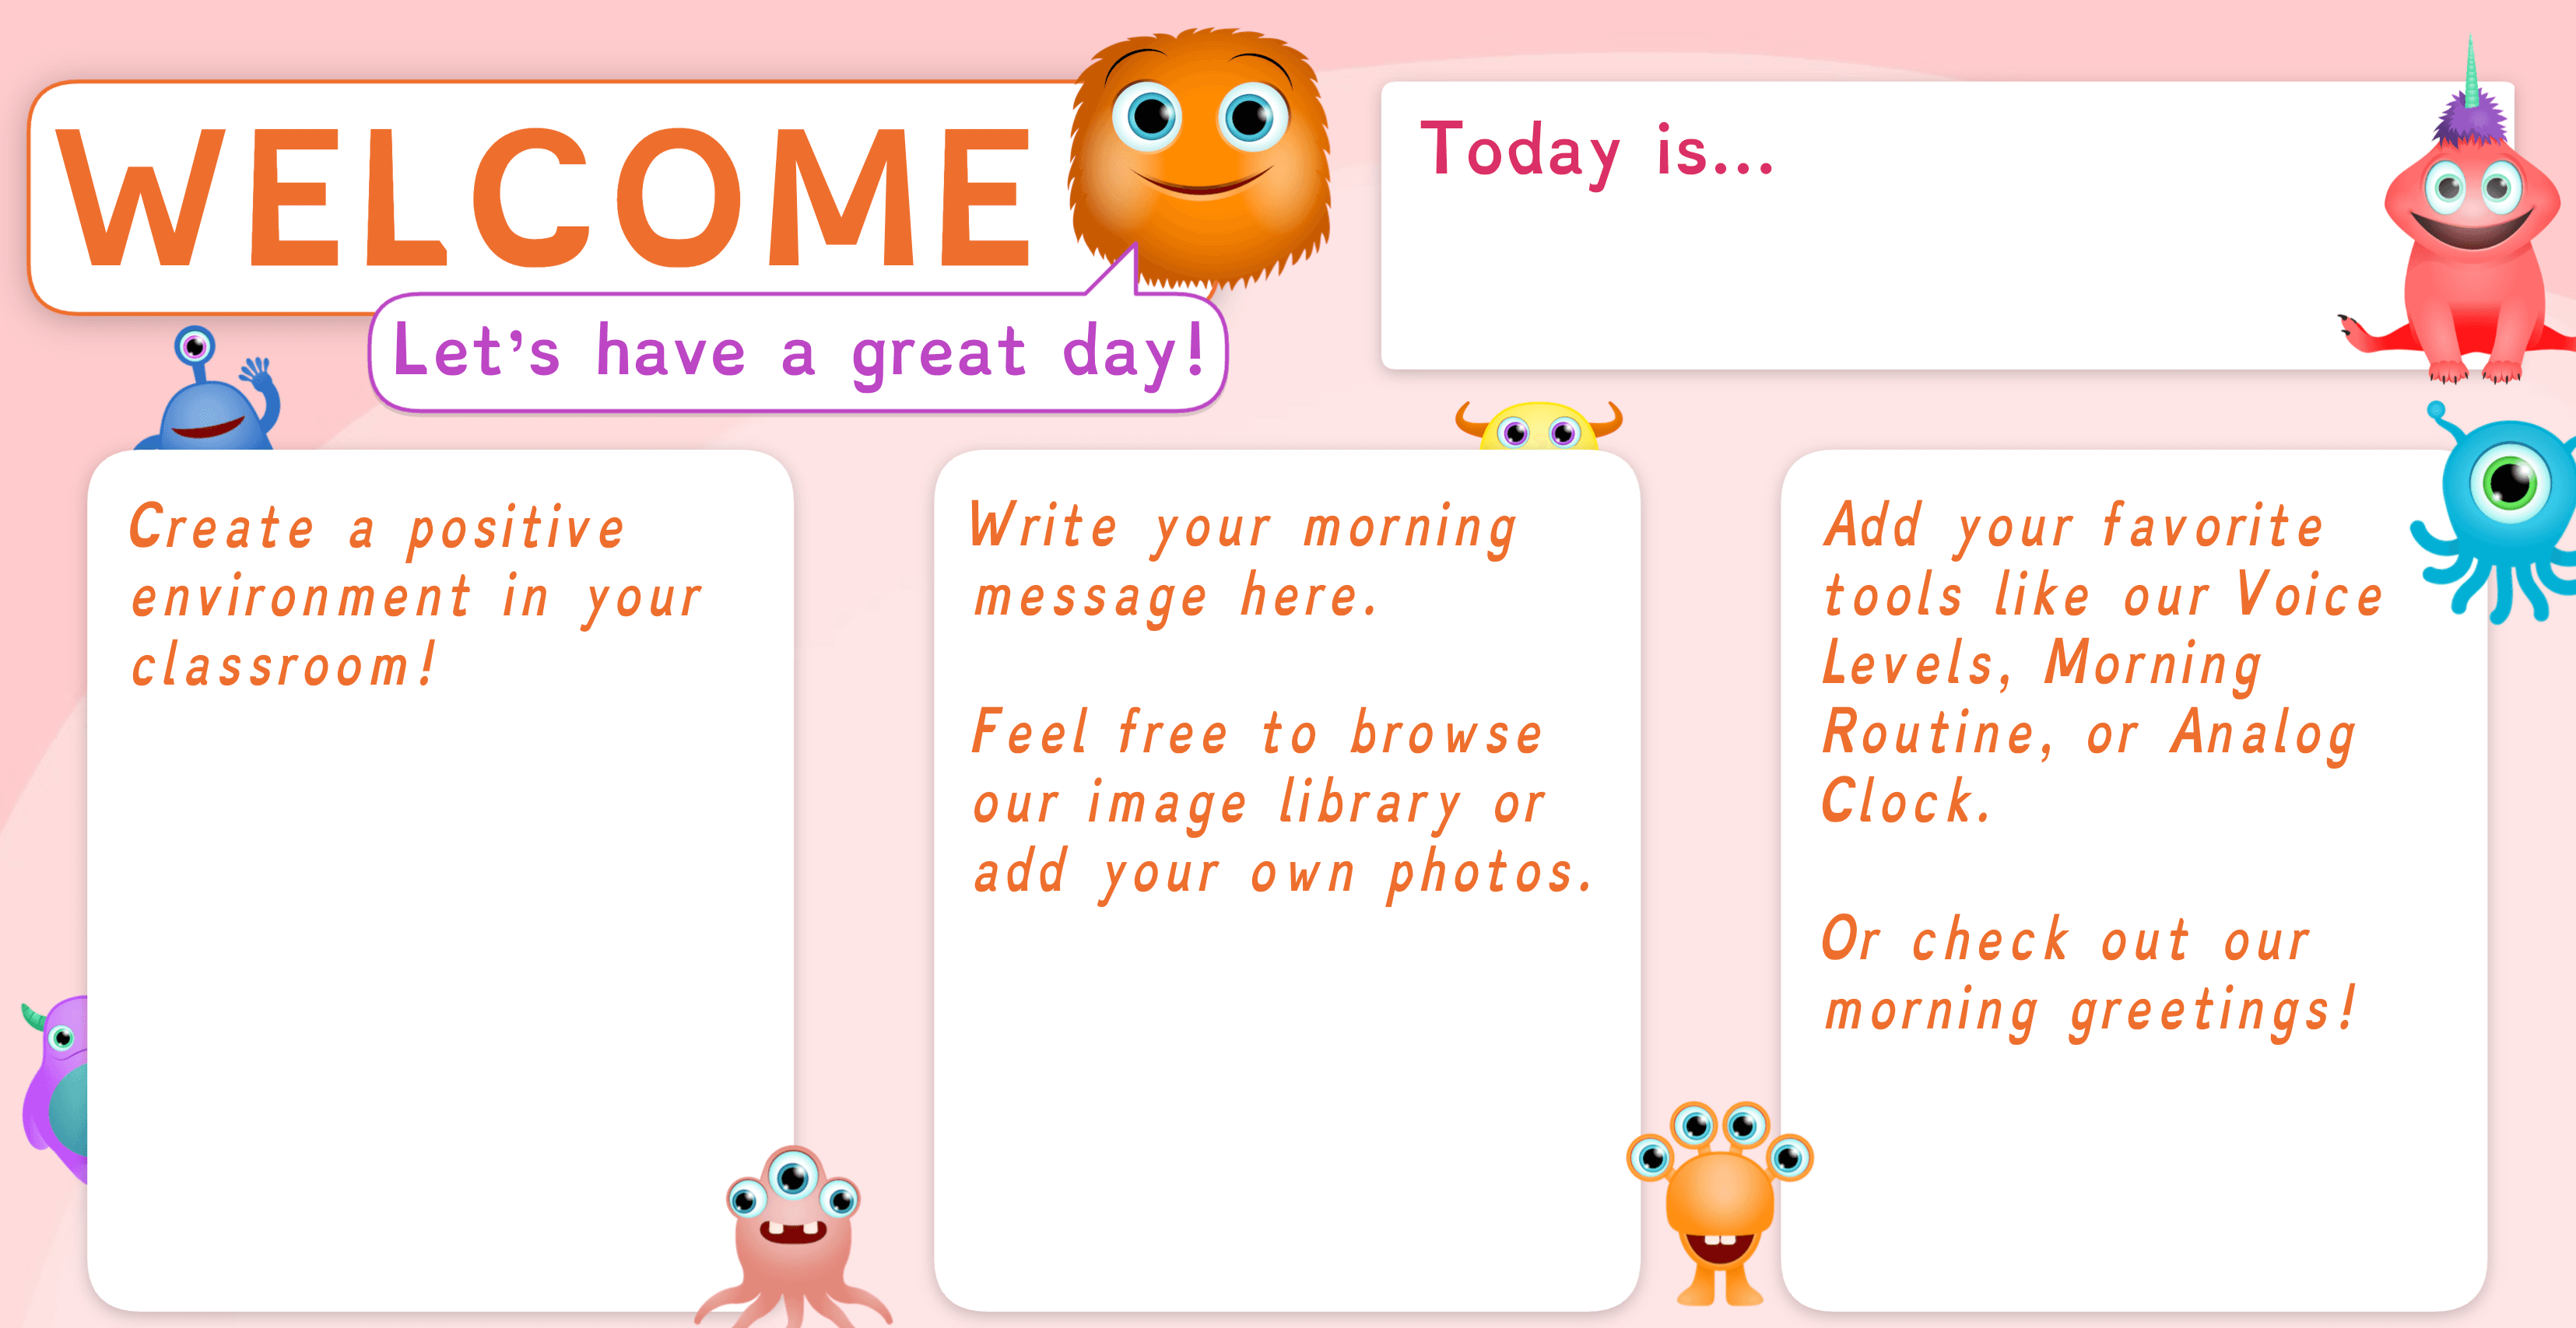 Example of a welcome template for an elementary school classroom